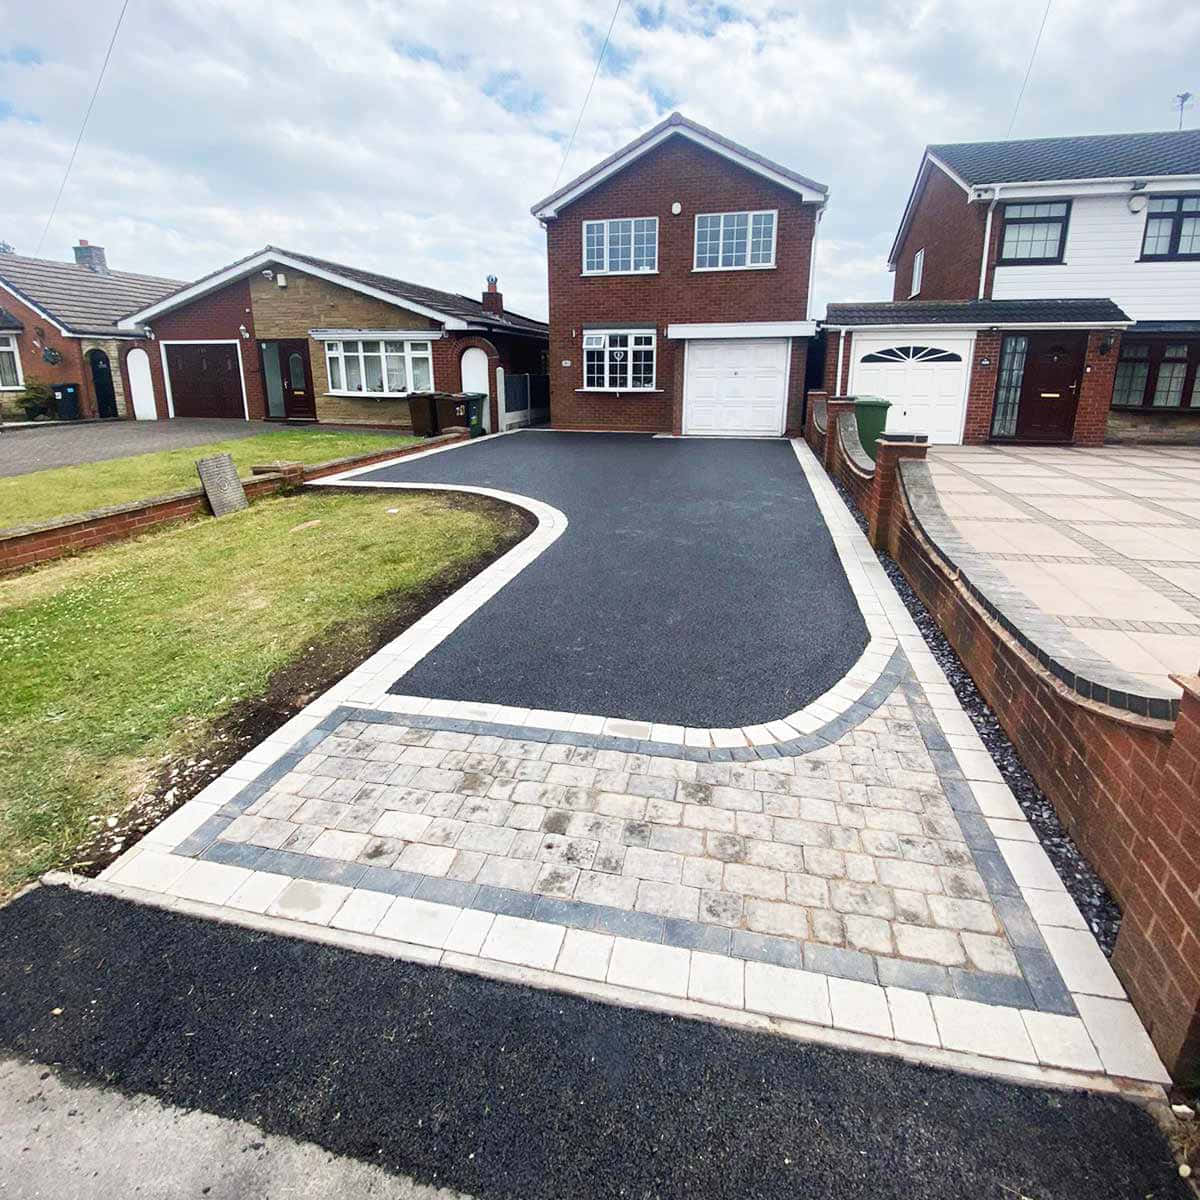 A Driveway With A Black Paved Area